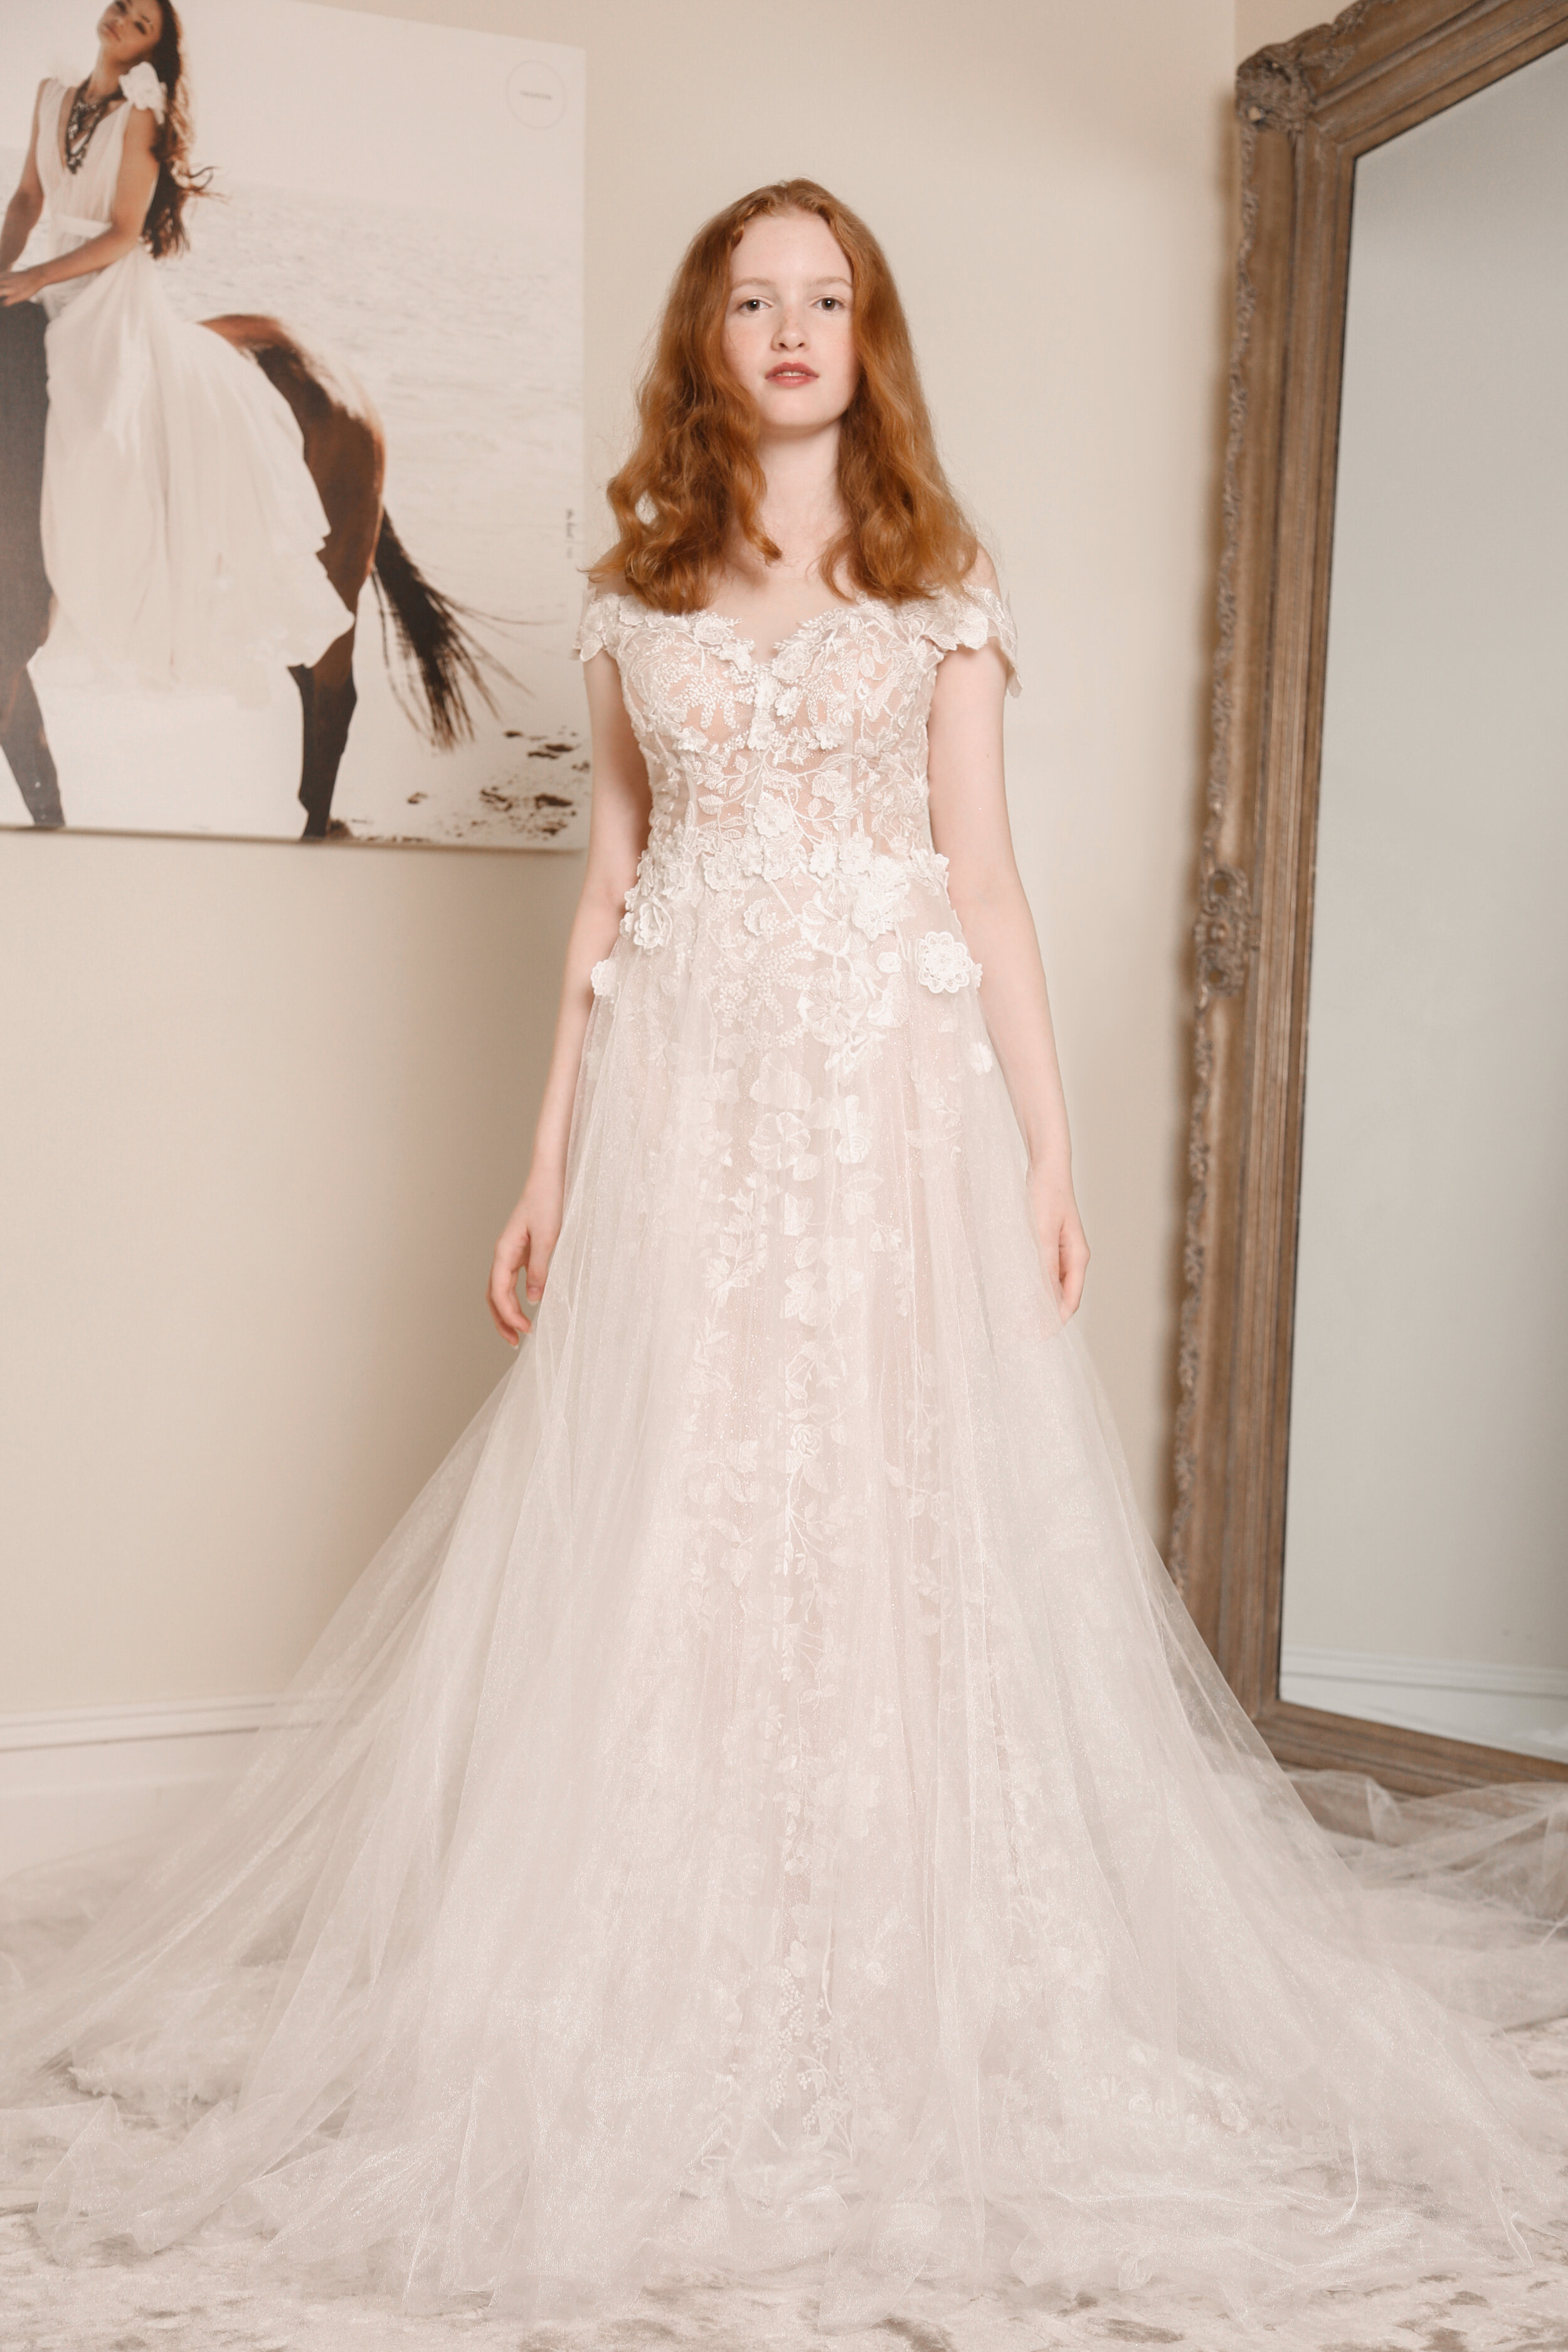 mermaid lace gown nelly